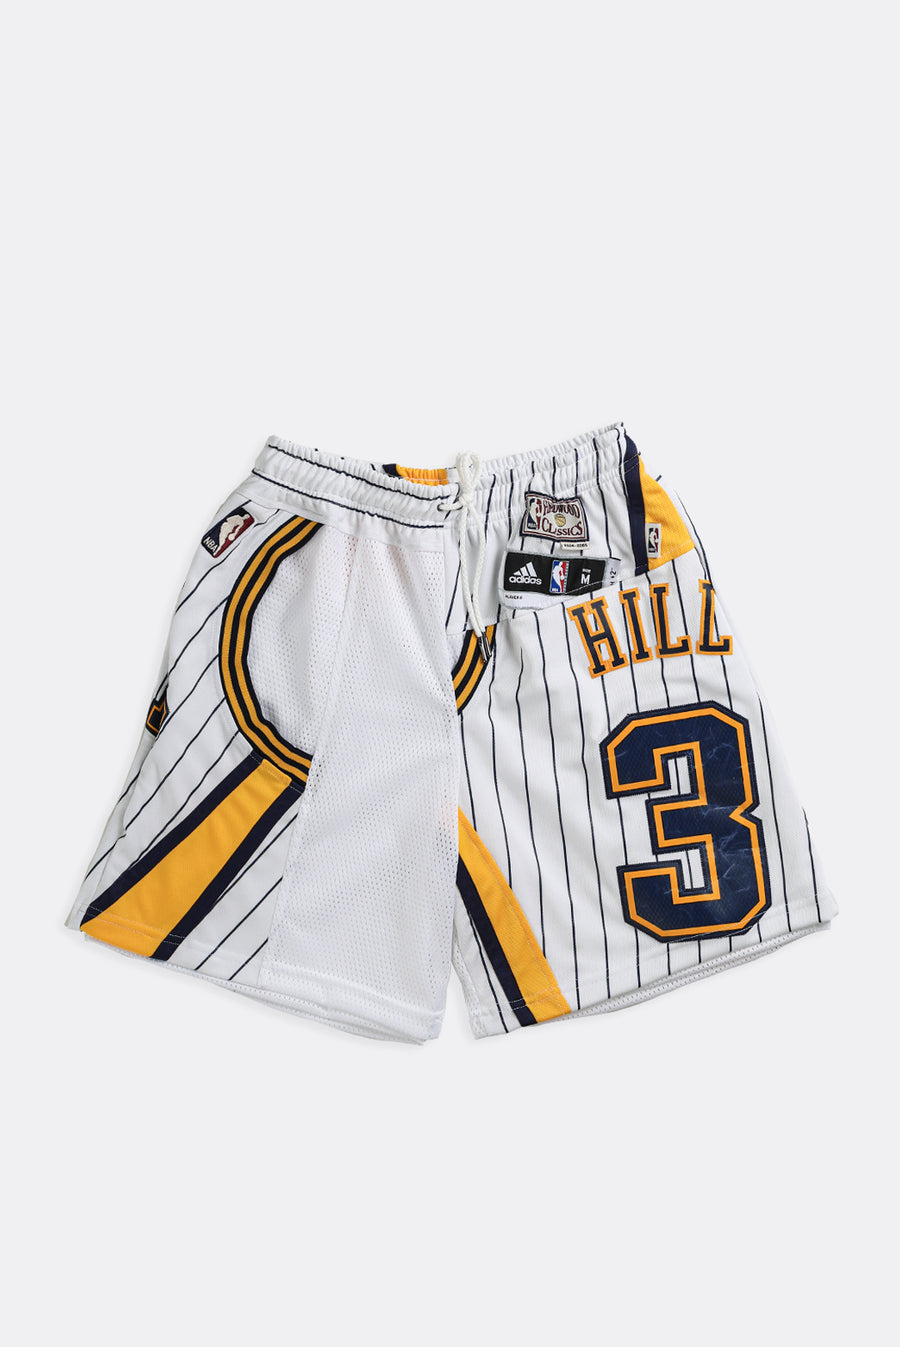 Pacers NBA jersey